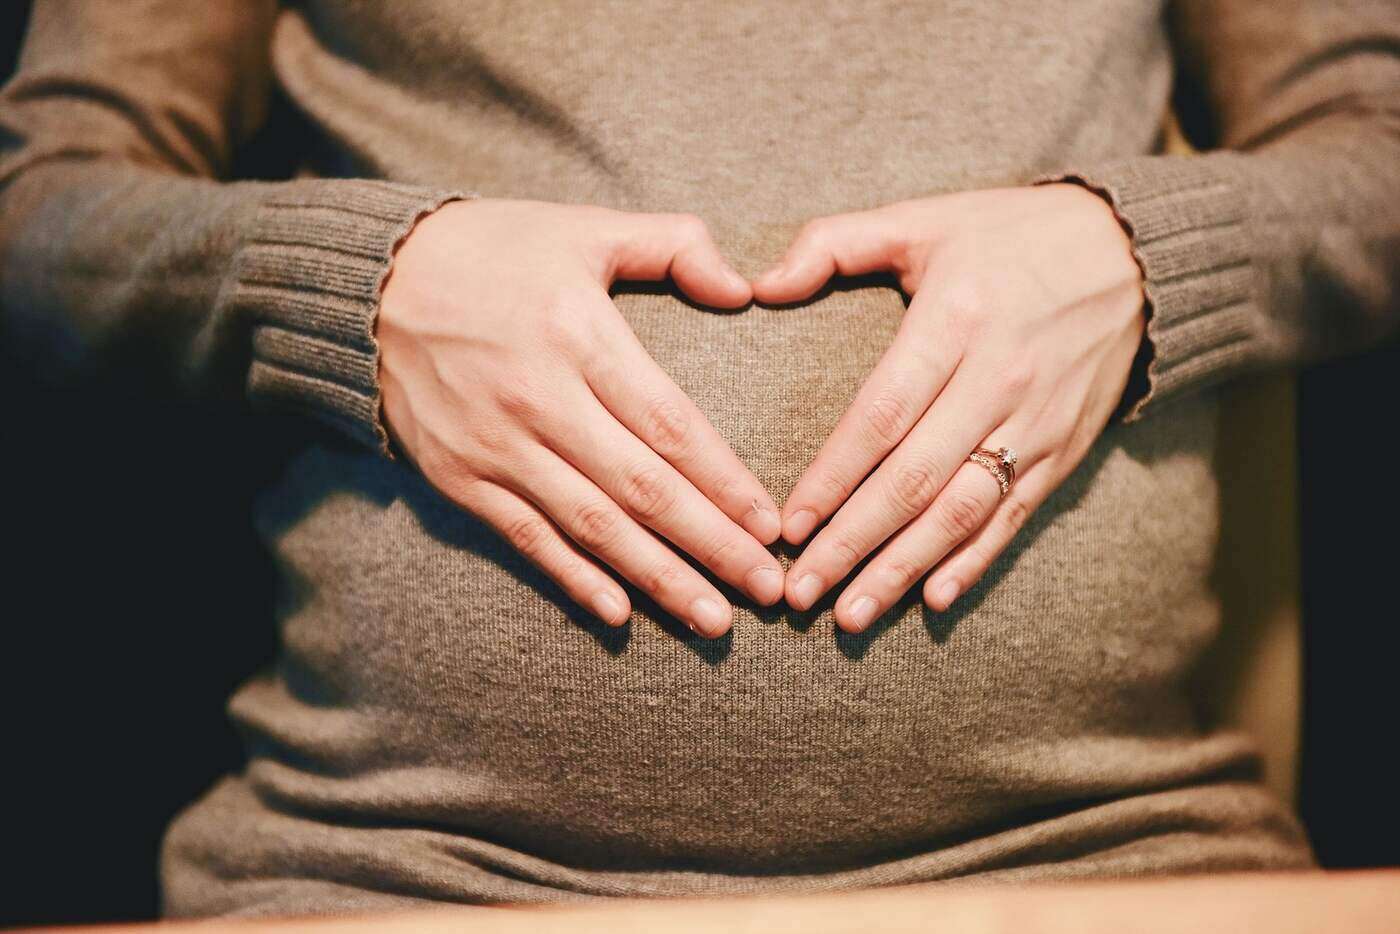 Pregnant woman with hands on belly